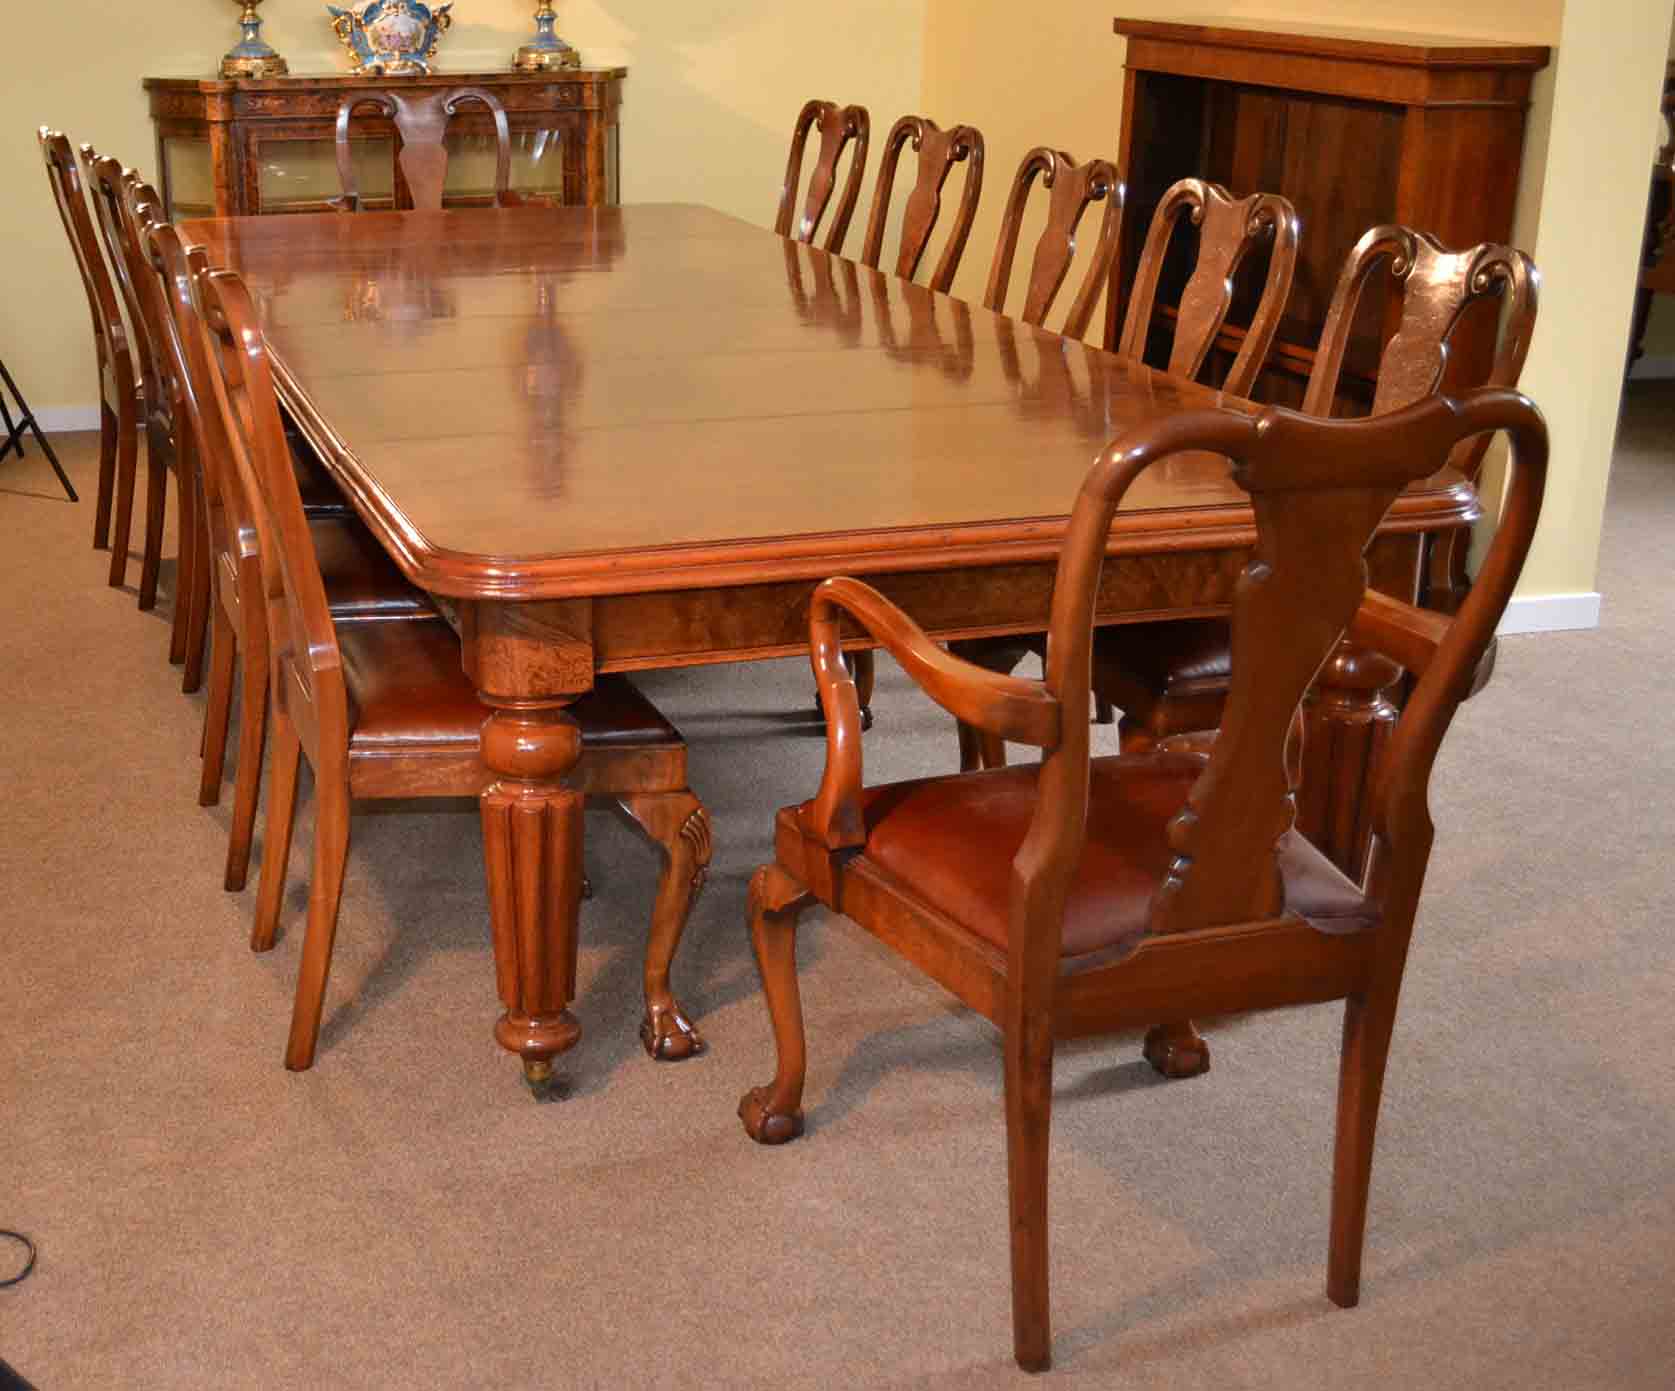 Antique Walnut Dining Room Table And Chairs